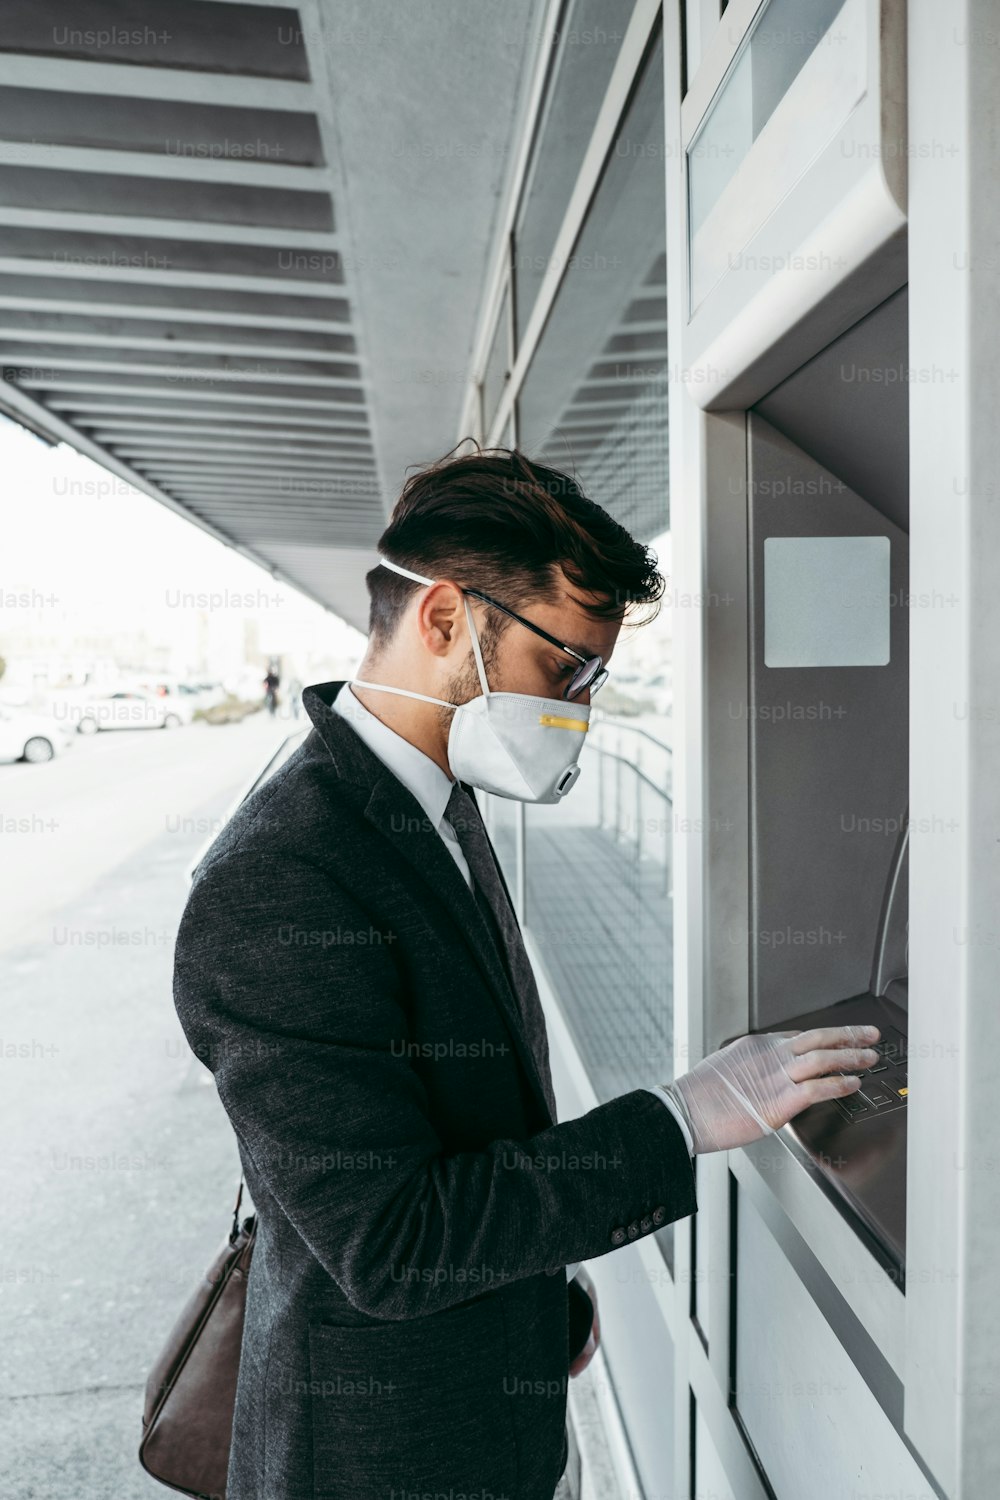 Business man with protective face mask and gloves using street ATM machine. Virus pandemic or epidemic concept.